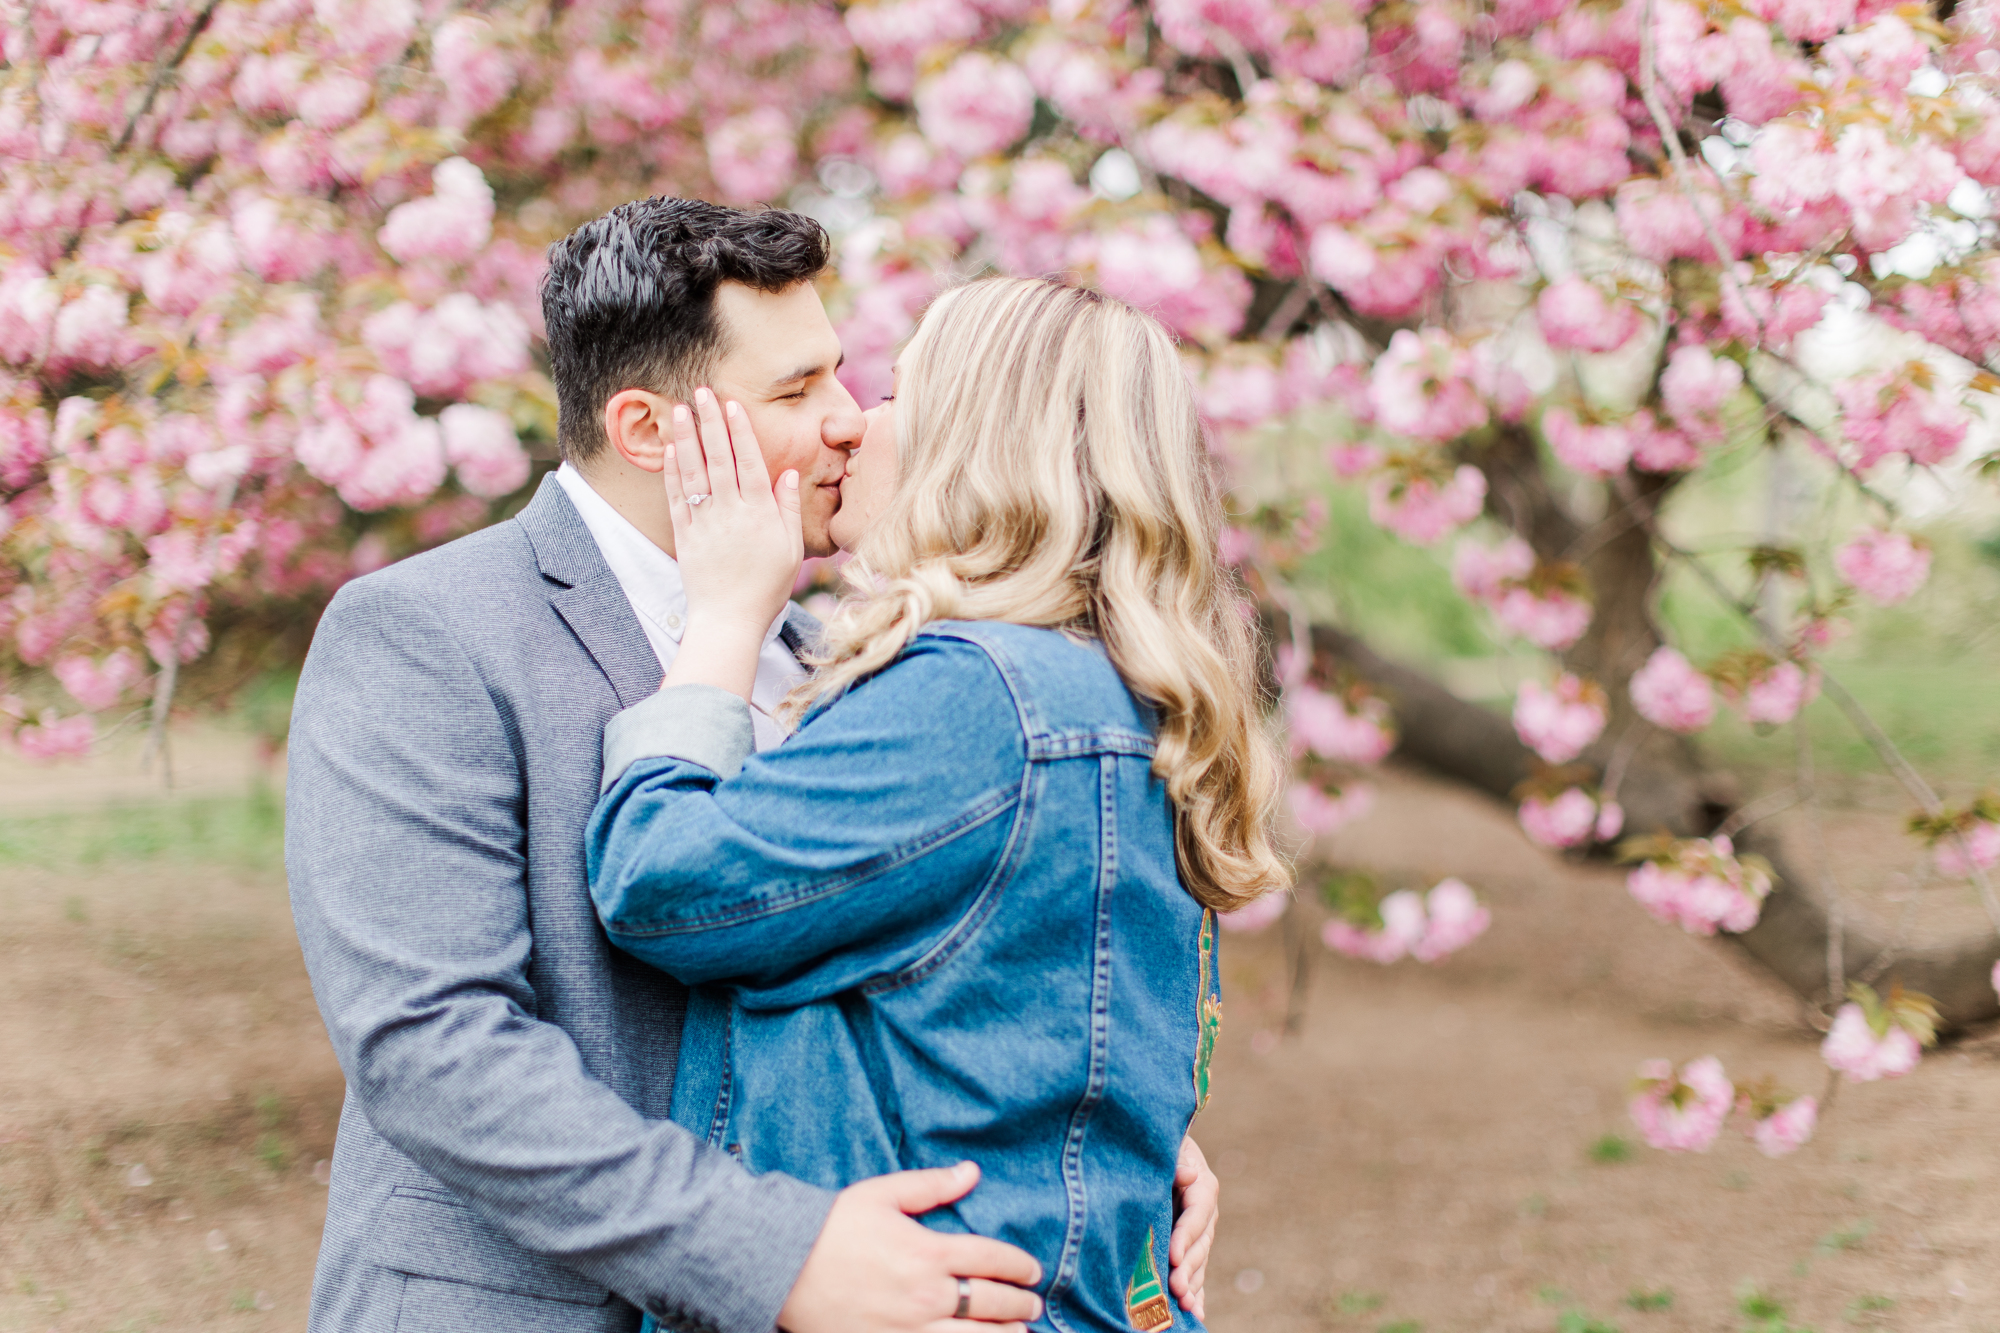 Vibrant Pose Ideas for your Engagement Session